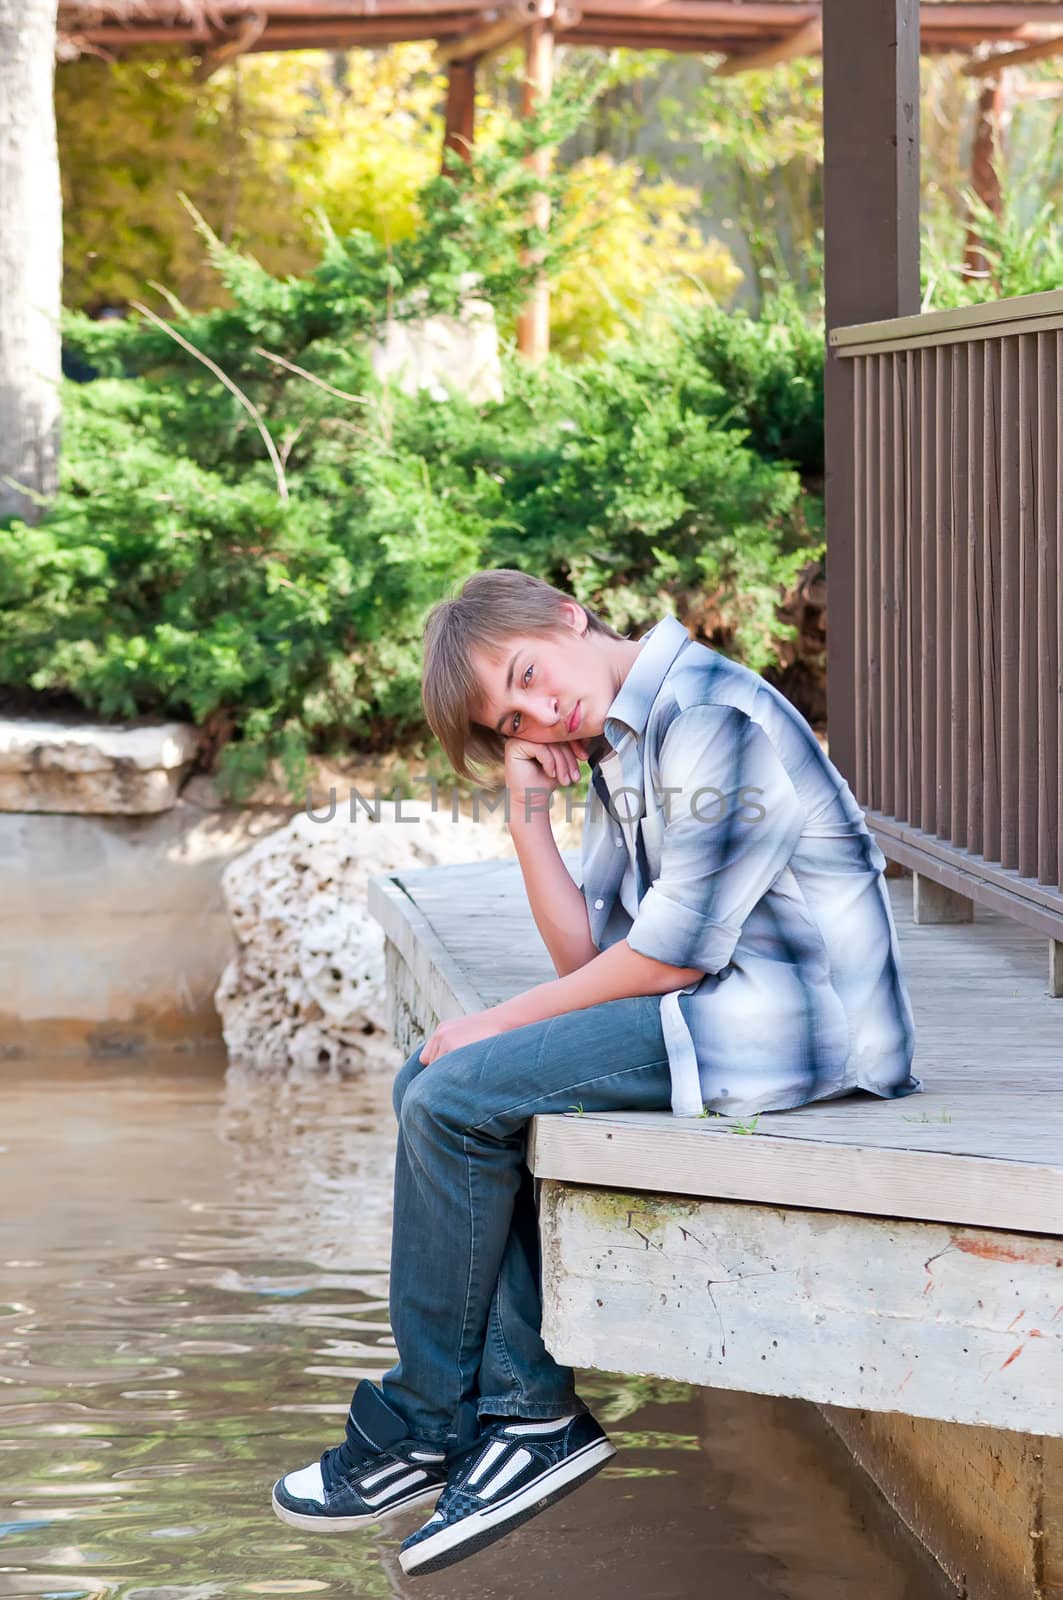 Portrait of a teenager on a background of water in the park.